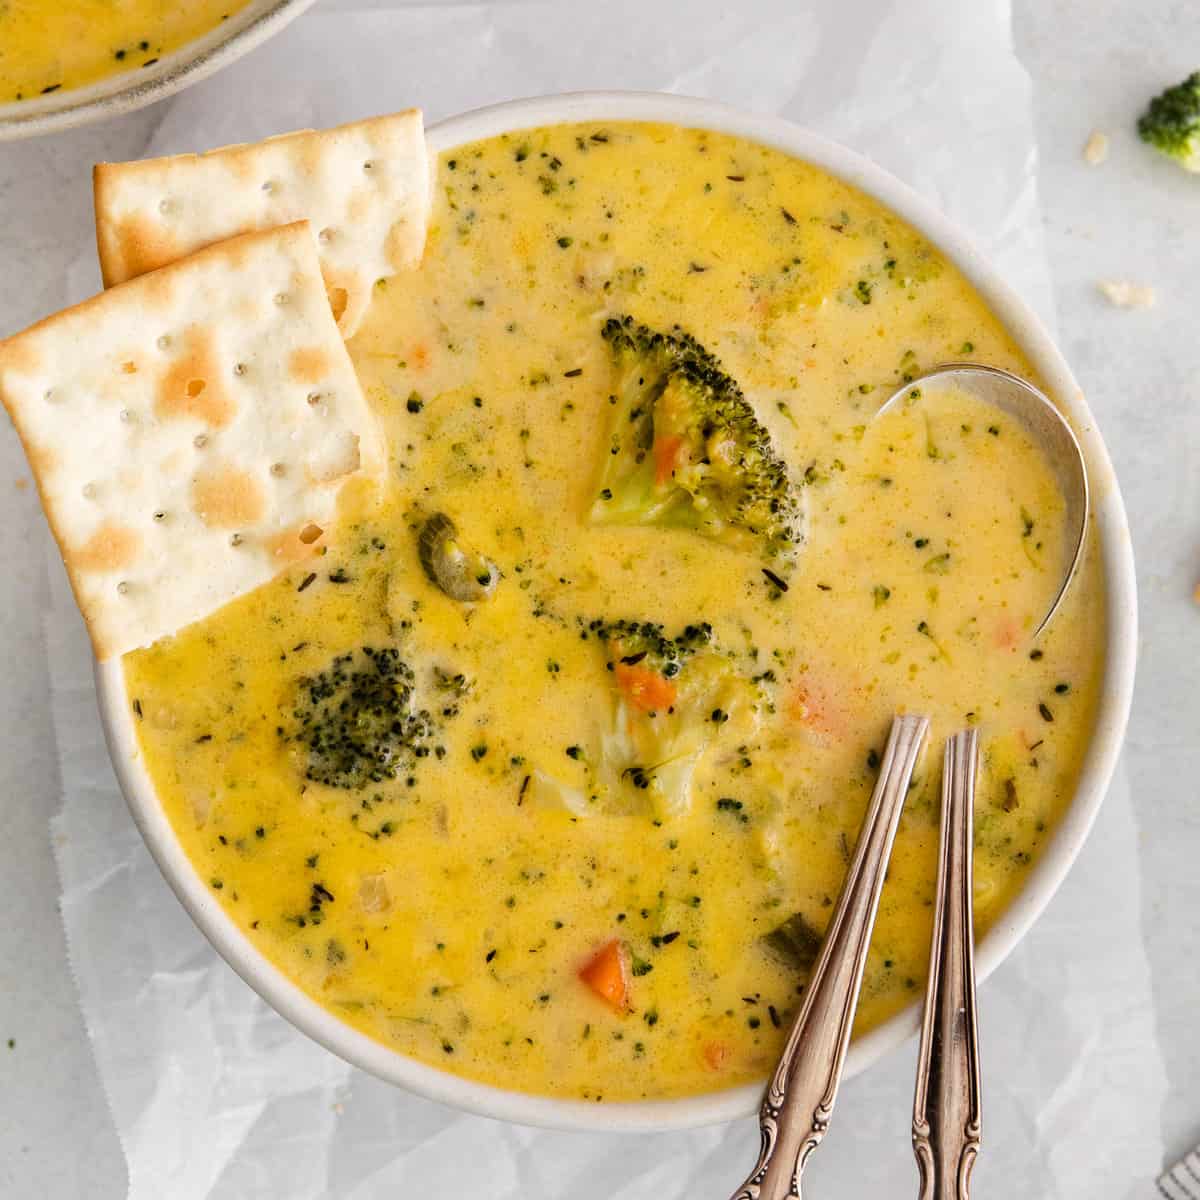 Broccoli potato soup in a bowl with crackers on the side.